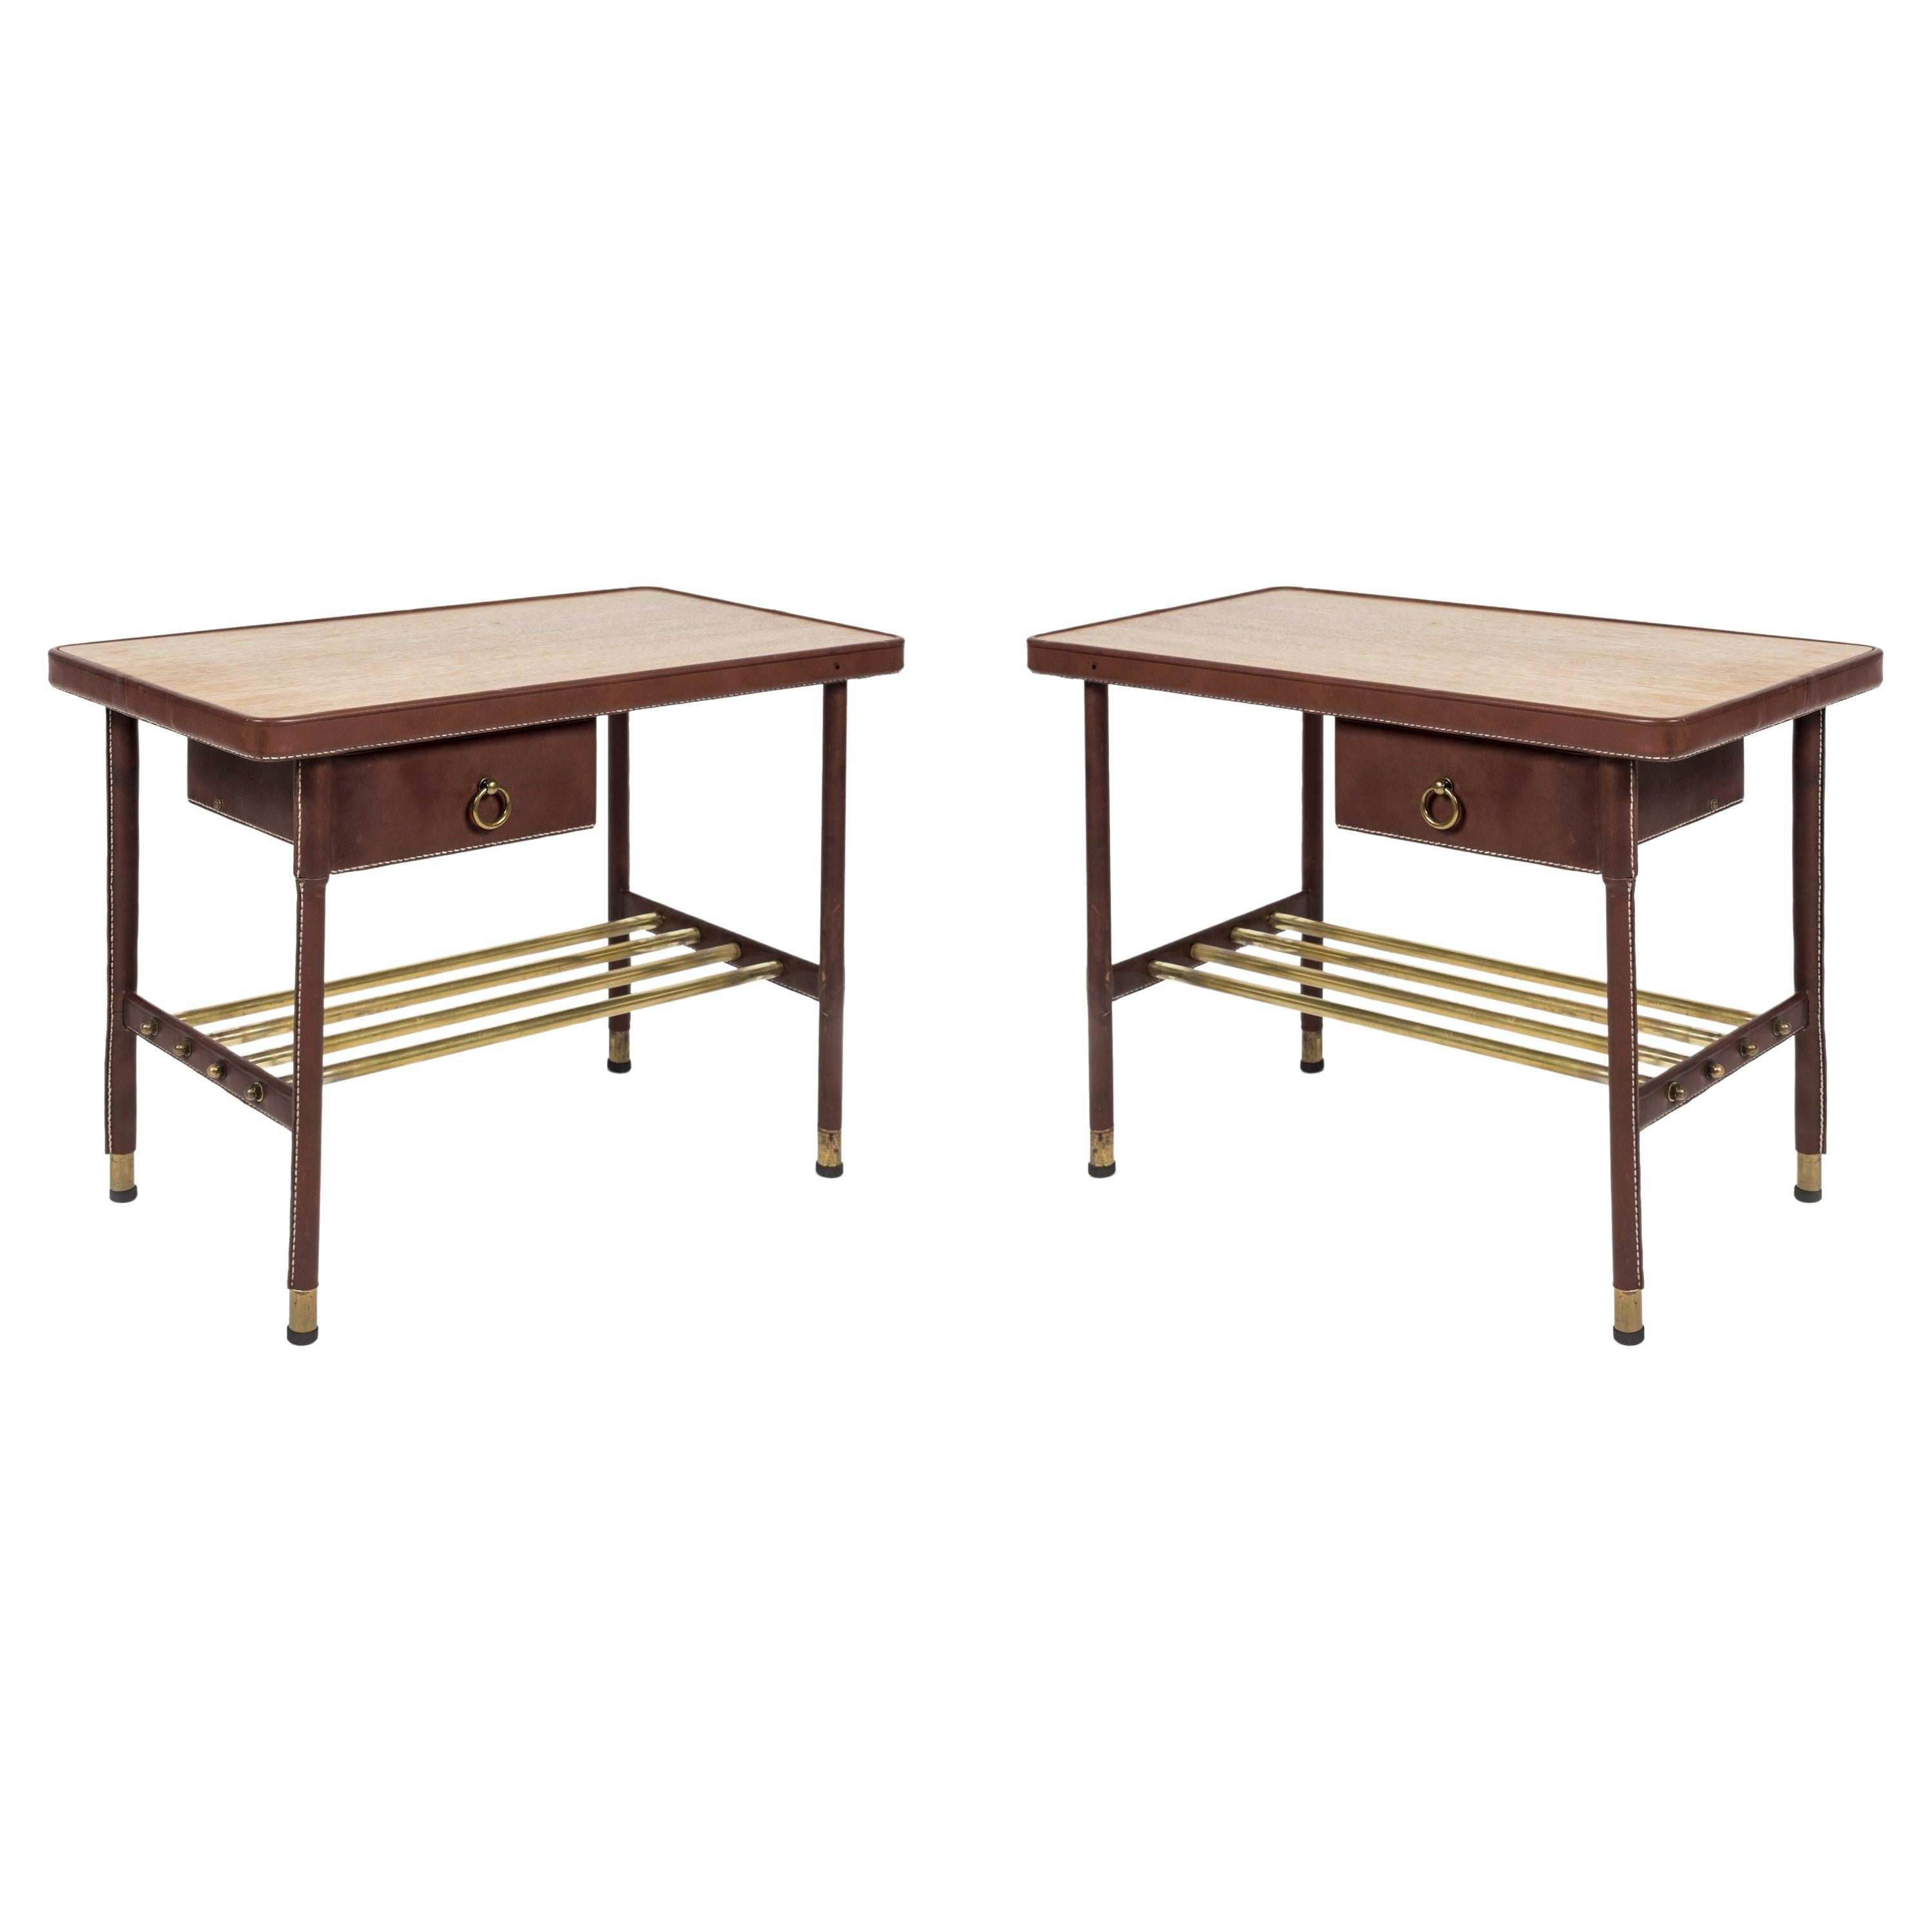 1950s Pair of Stitched Leather Side Tables by Jacques Adnet